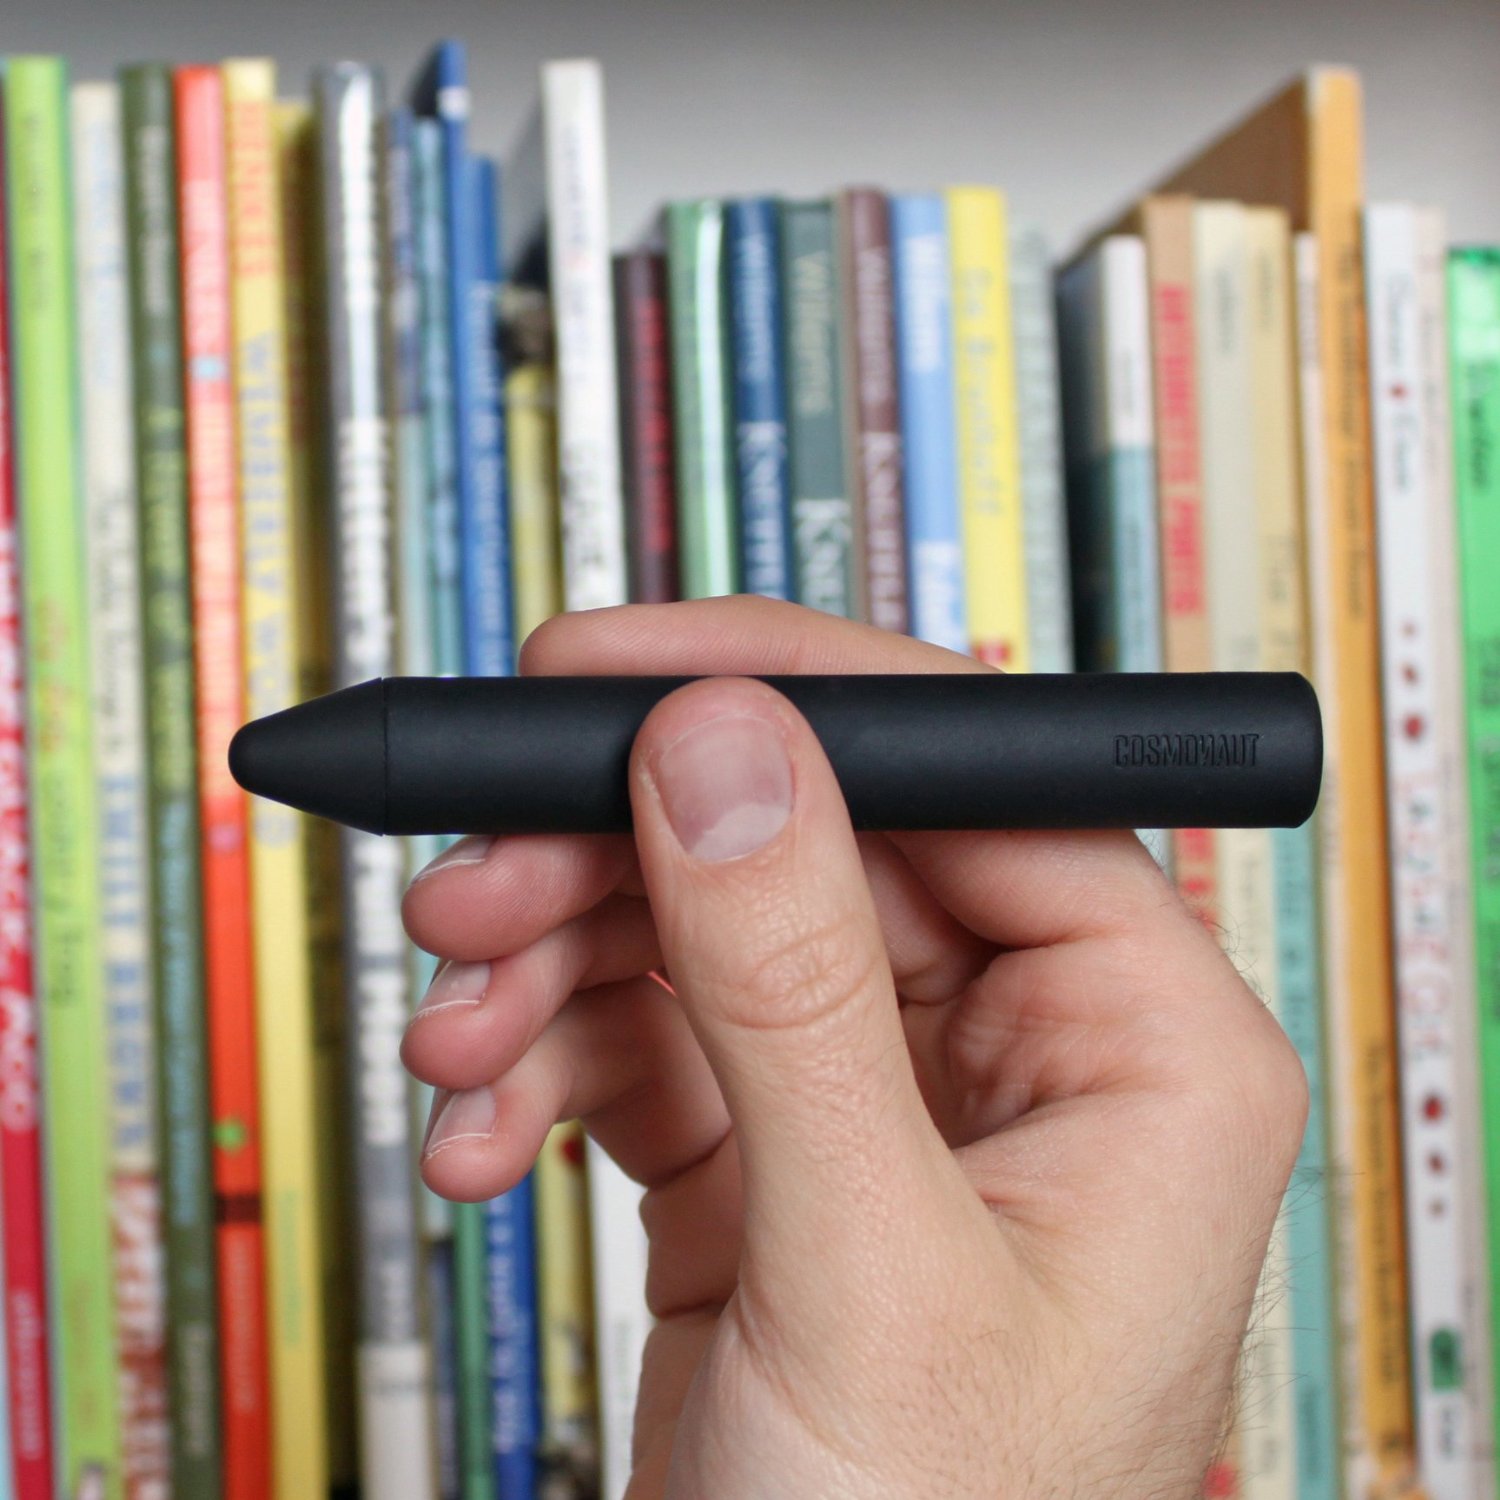 Cosmonaut- Wide-Grip Stylus for Capacitive Touch Screens